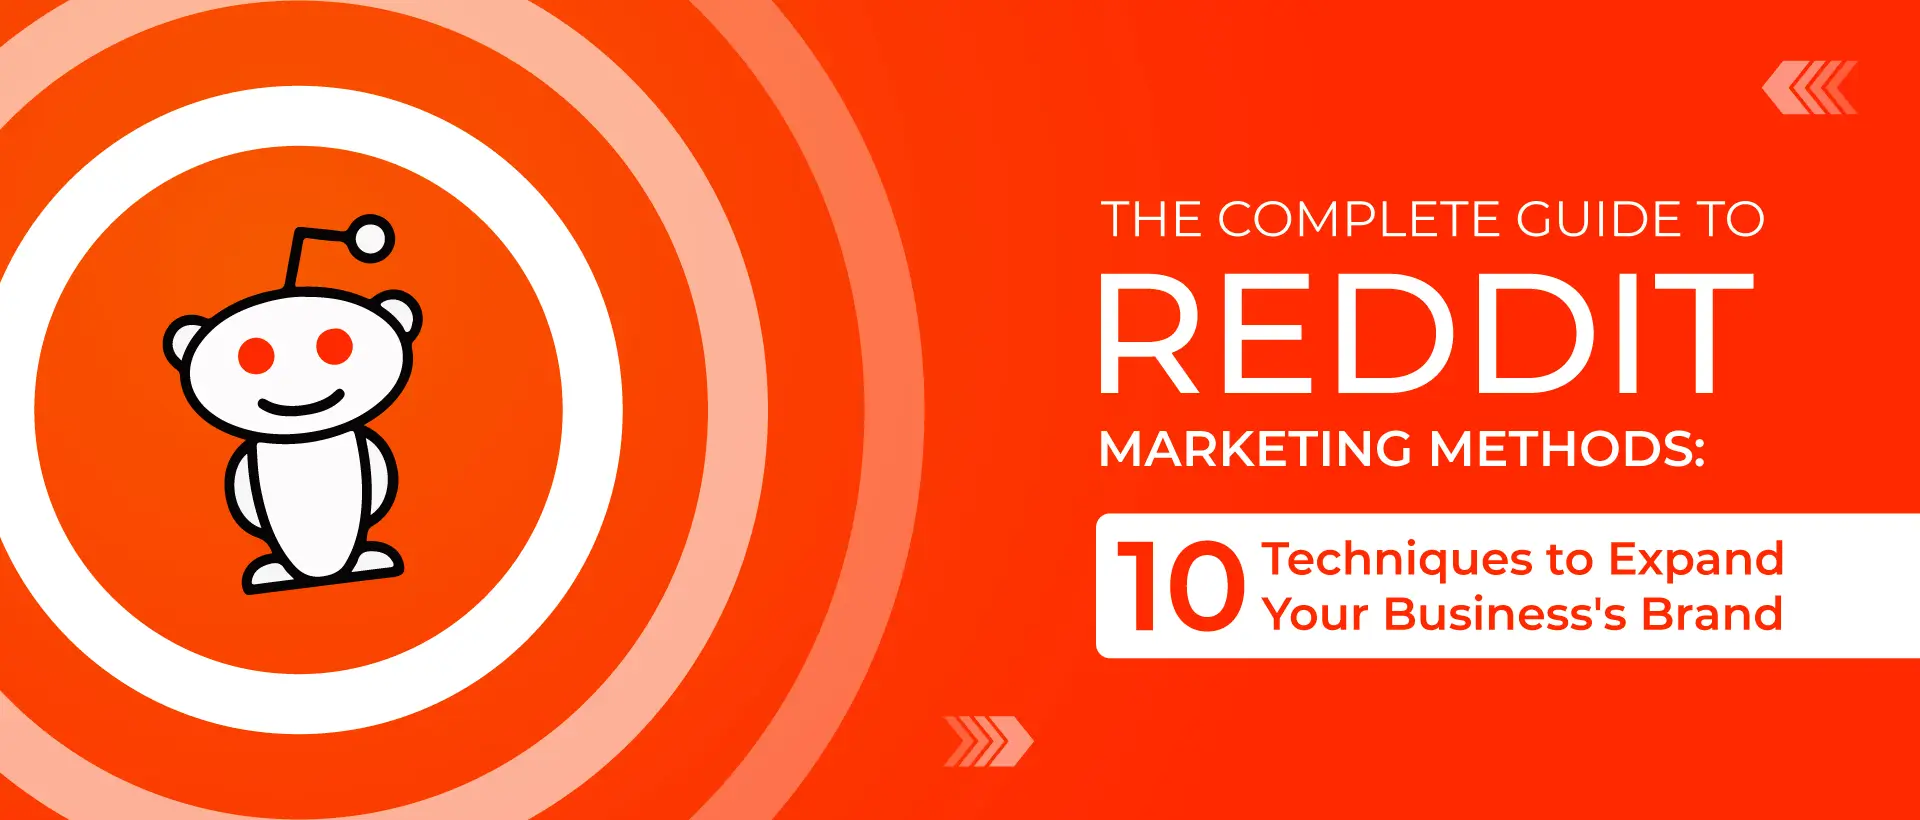 The Complete Guide to Reddit Marketing Methods: Ten Techniques to Expand Your Business's Brand